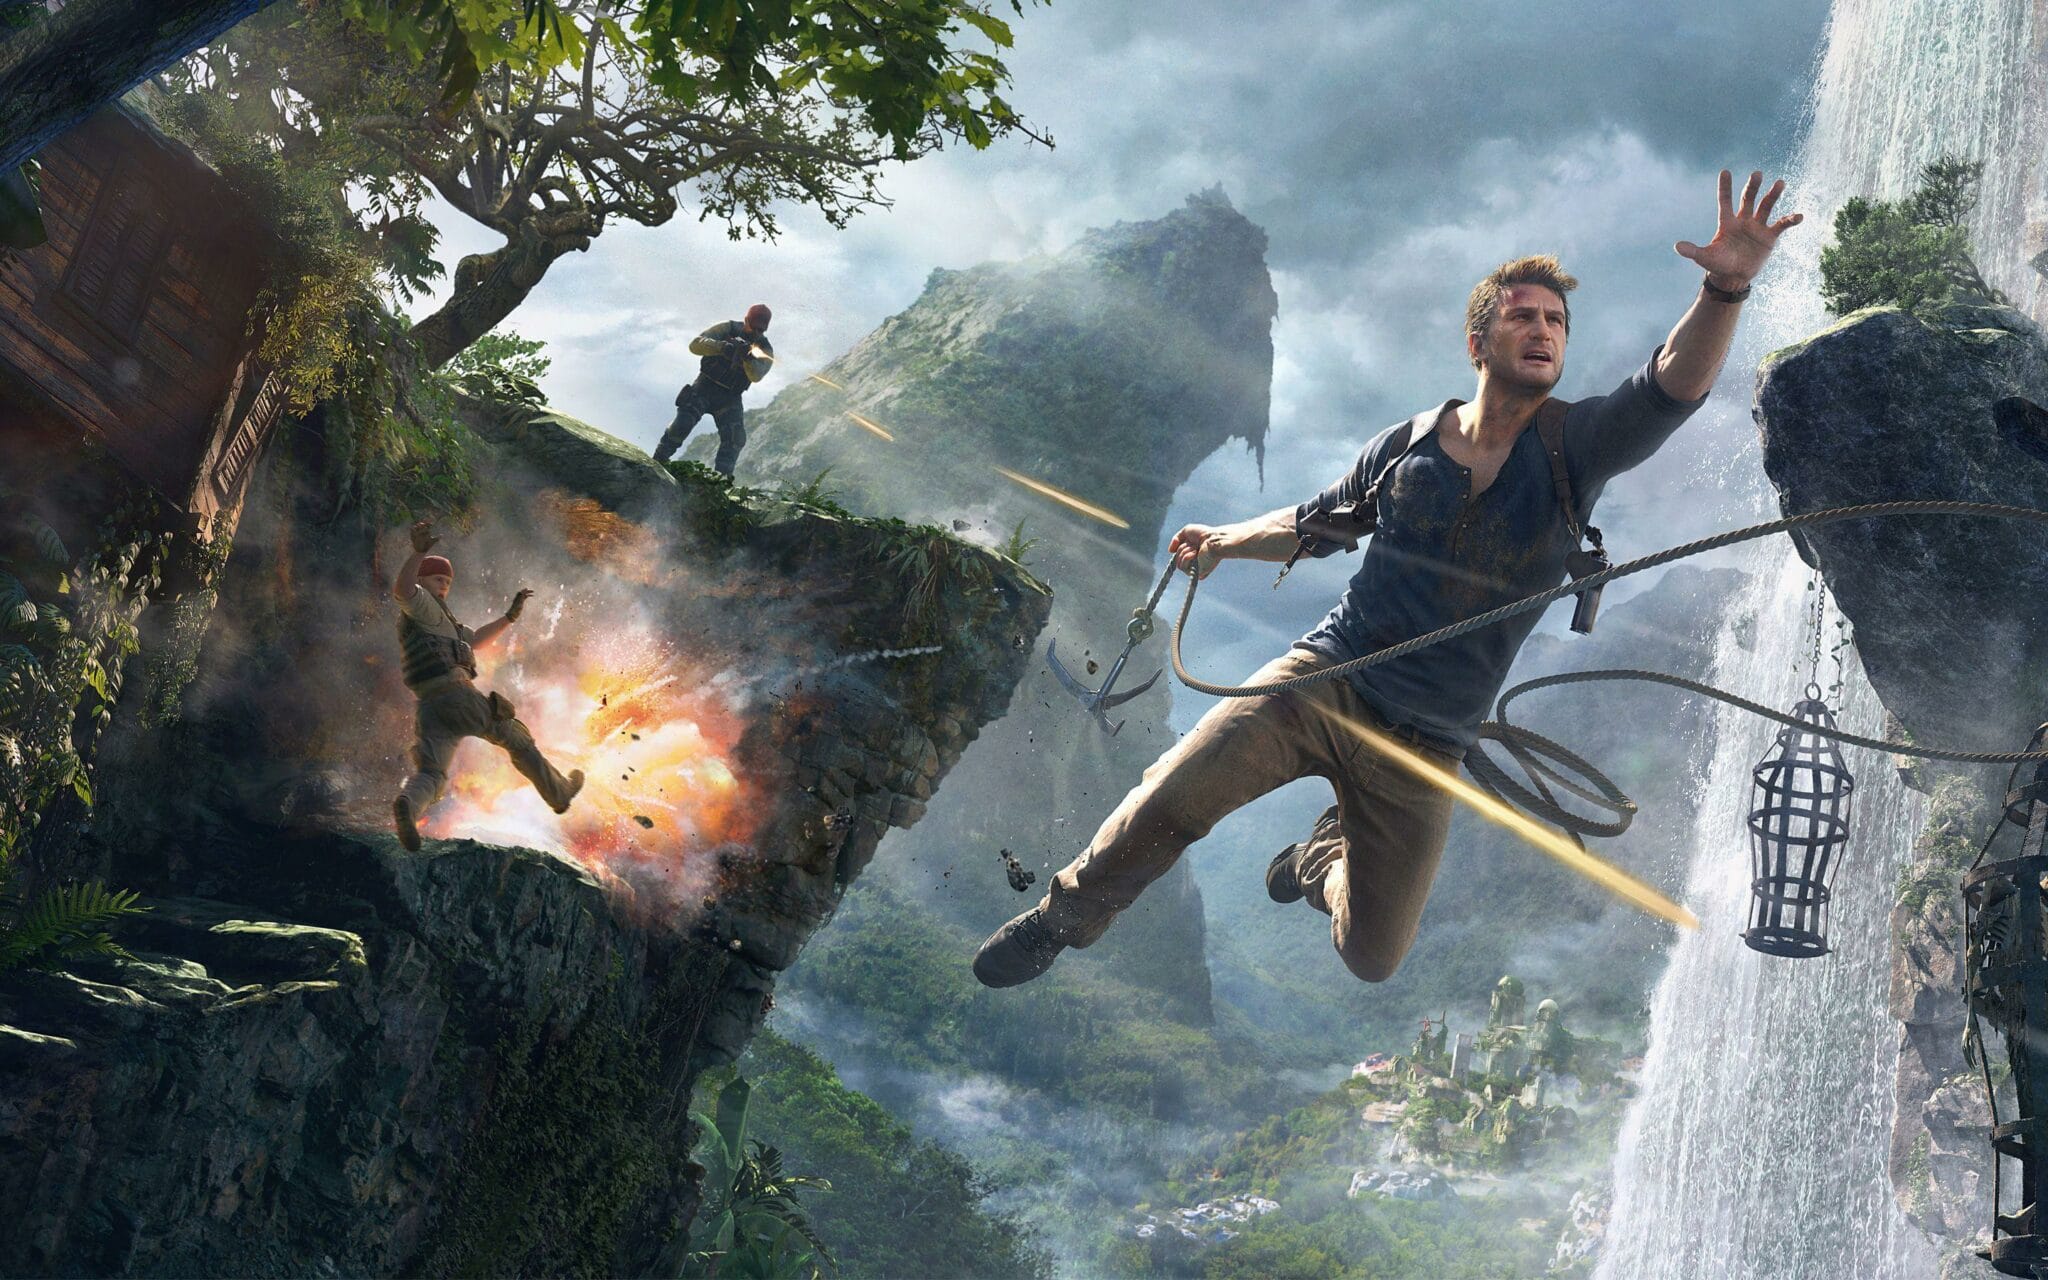 PC gamers have been missing out on a real Sony highlight. But now Uncharted is finally coming to home computers with the Legacy of Thieves Collection.